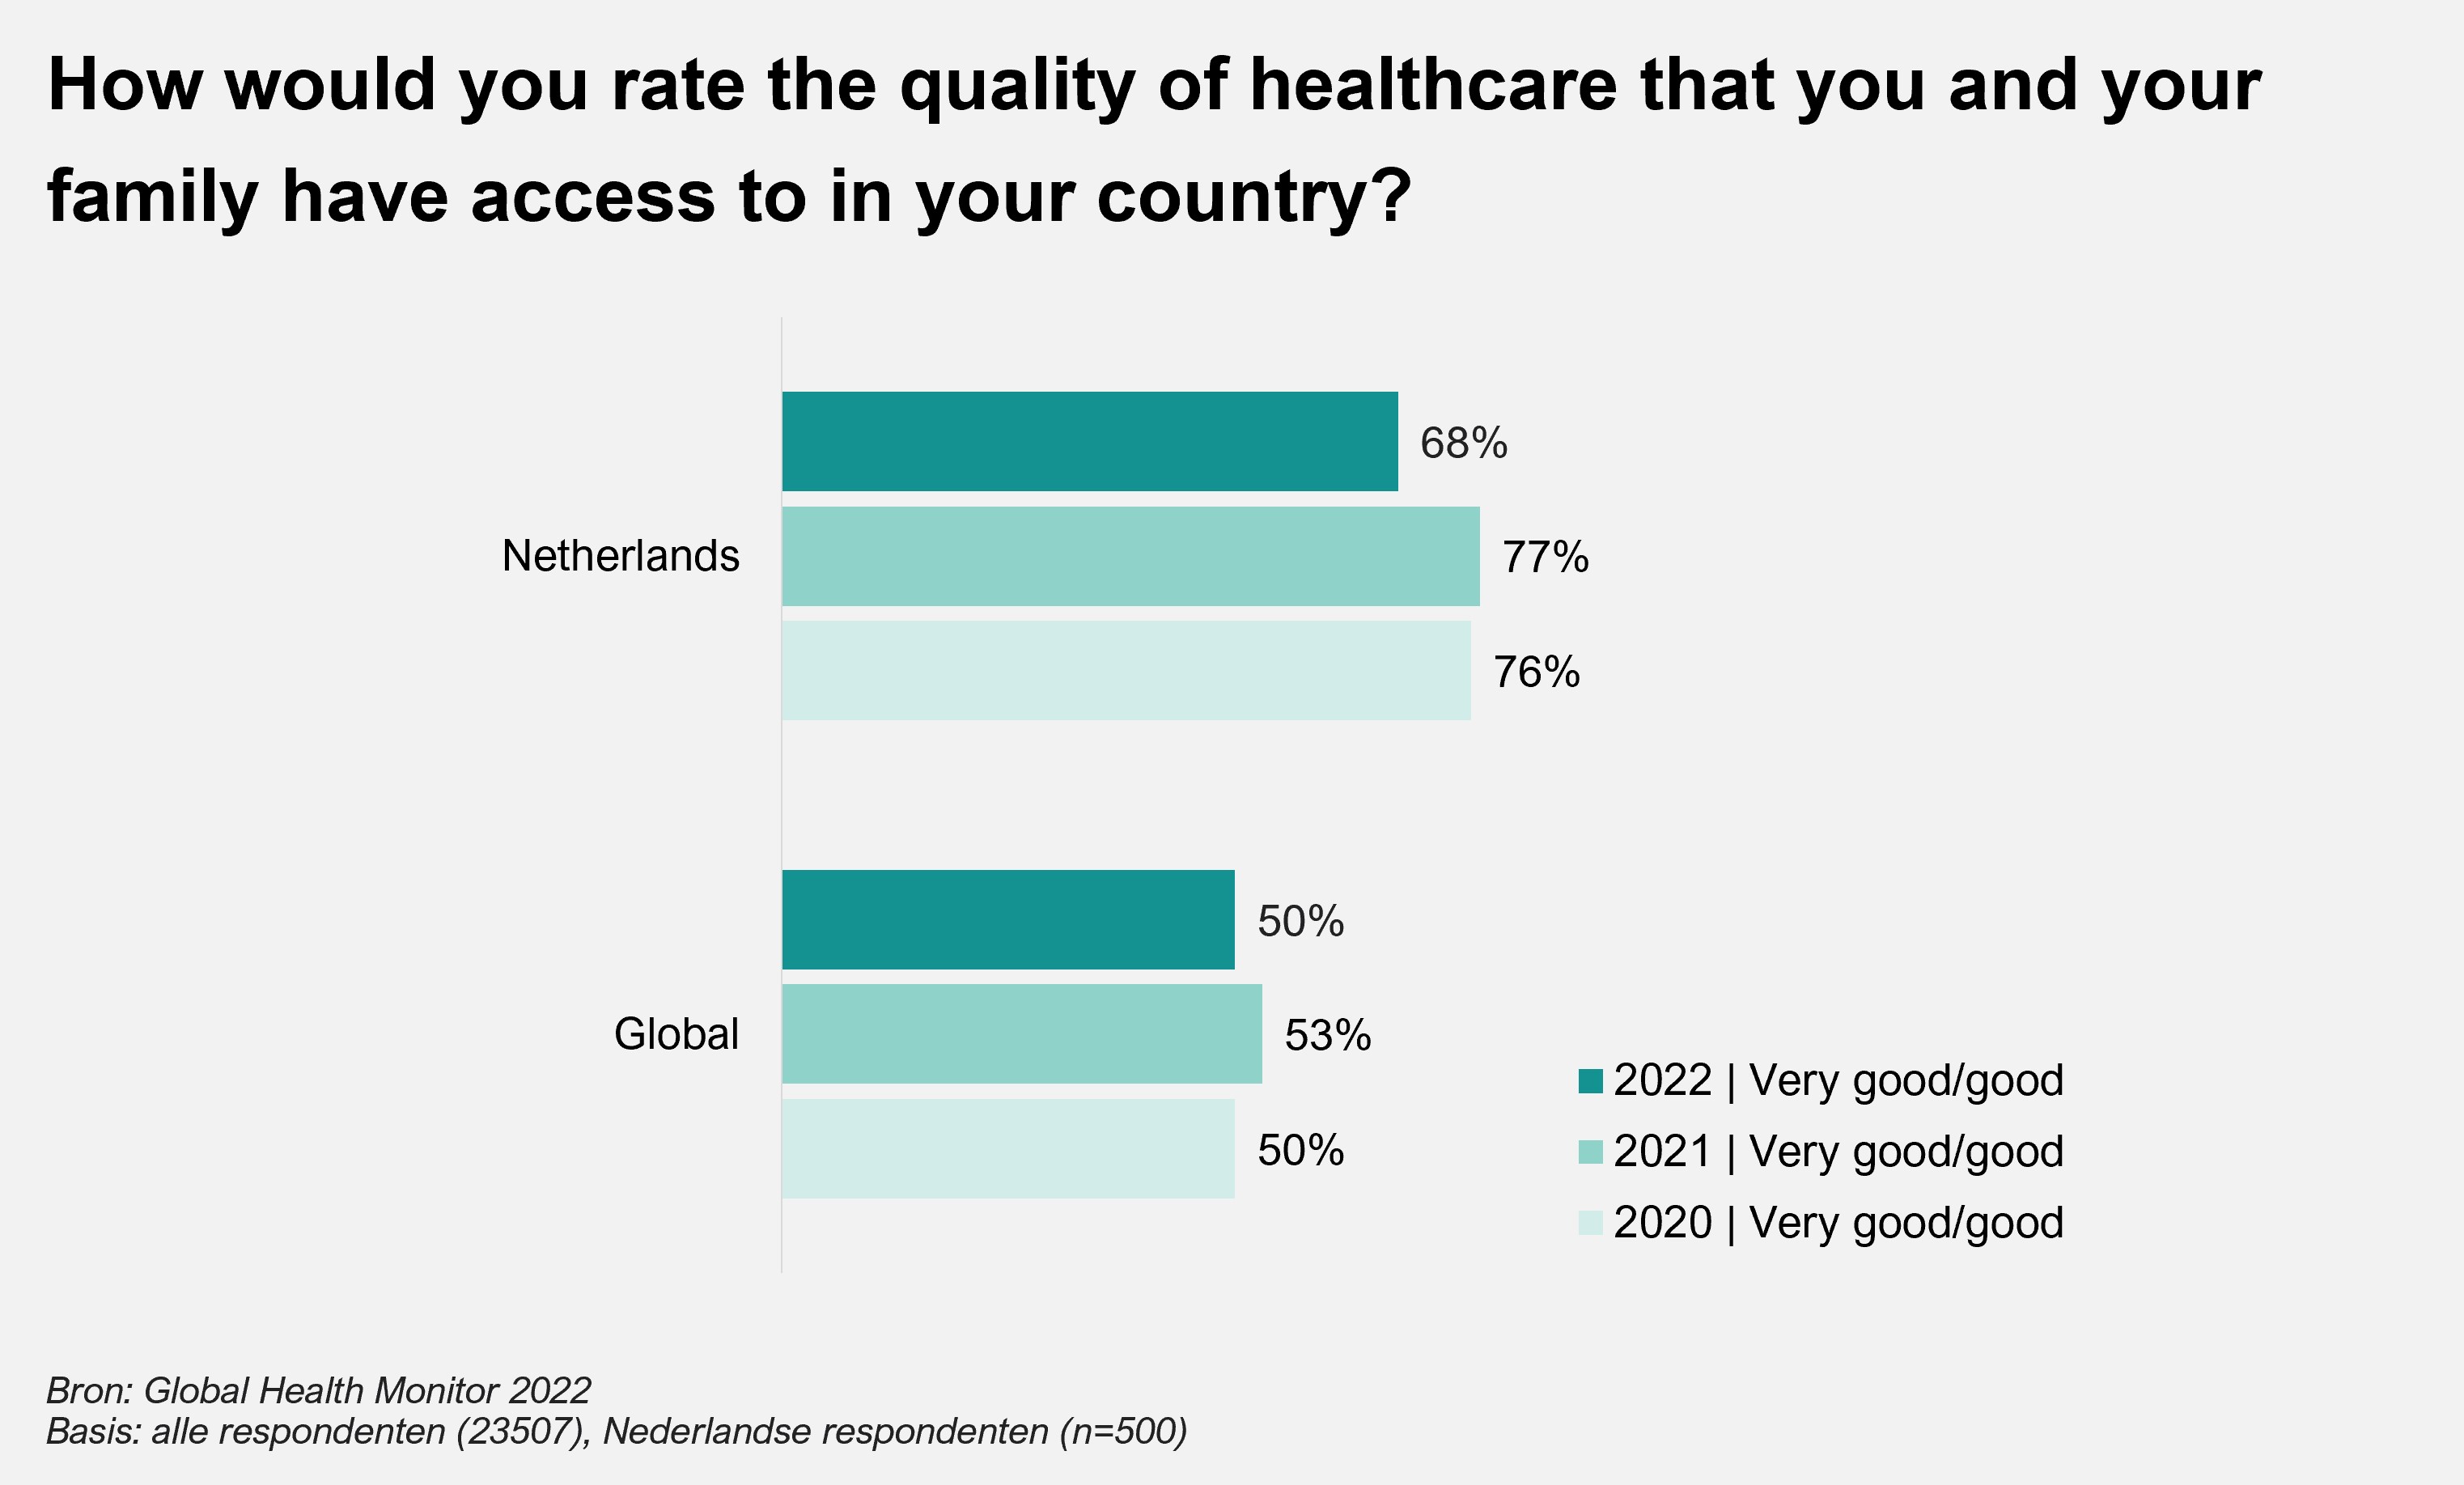 How would you rate the quality of healthcare that you and your family have access to in your country?